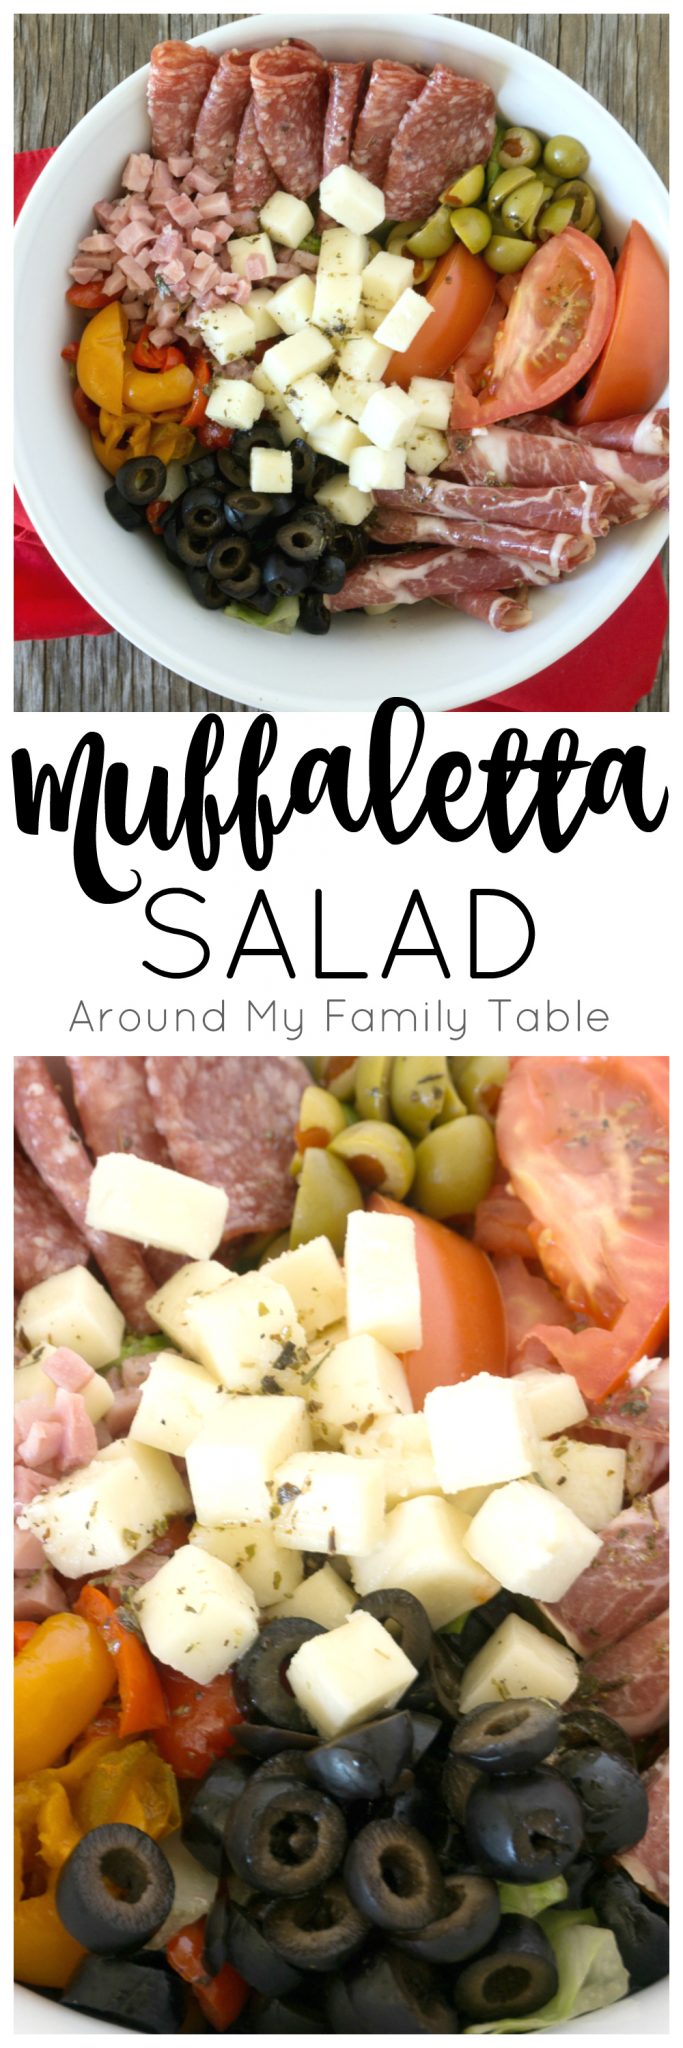 There is nothing better for supper on a hot evening than a delicious salad. This Muffaletta Salad has all the flavors you expect in the traditional sandwich, but in salad form!